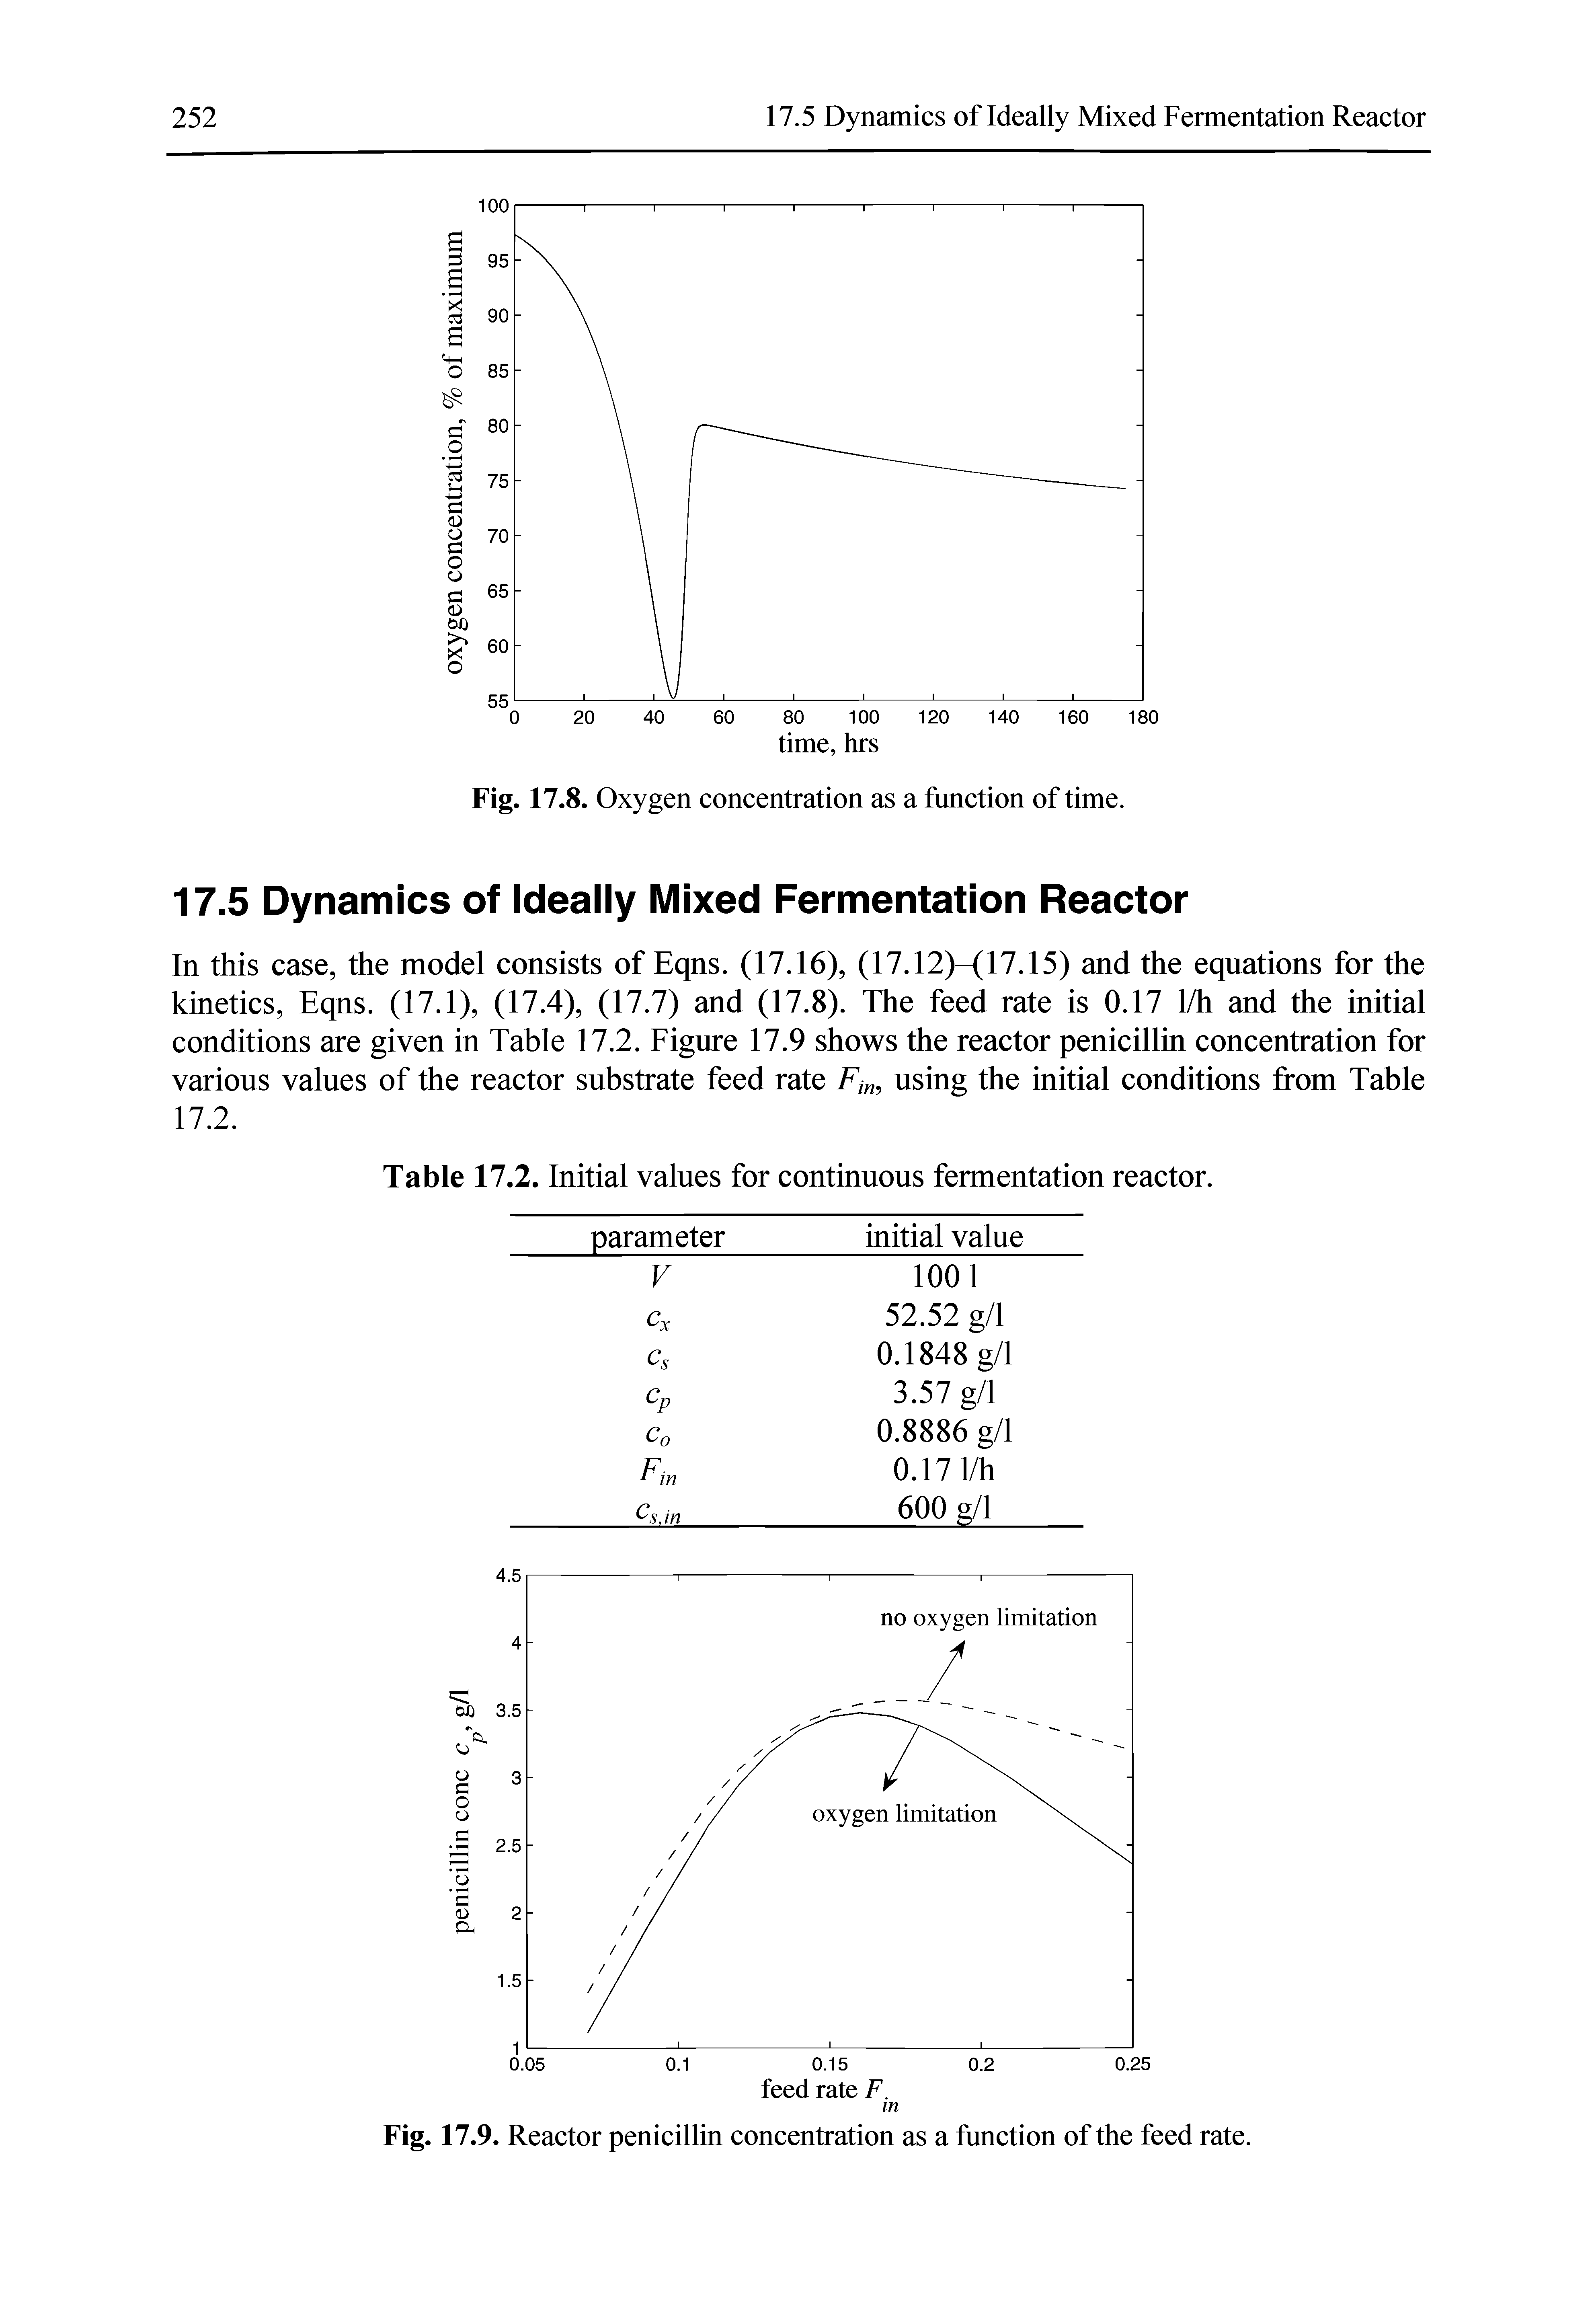 Fig. 17.9. Reactor penicillin concentration as a function of the feed rate.